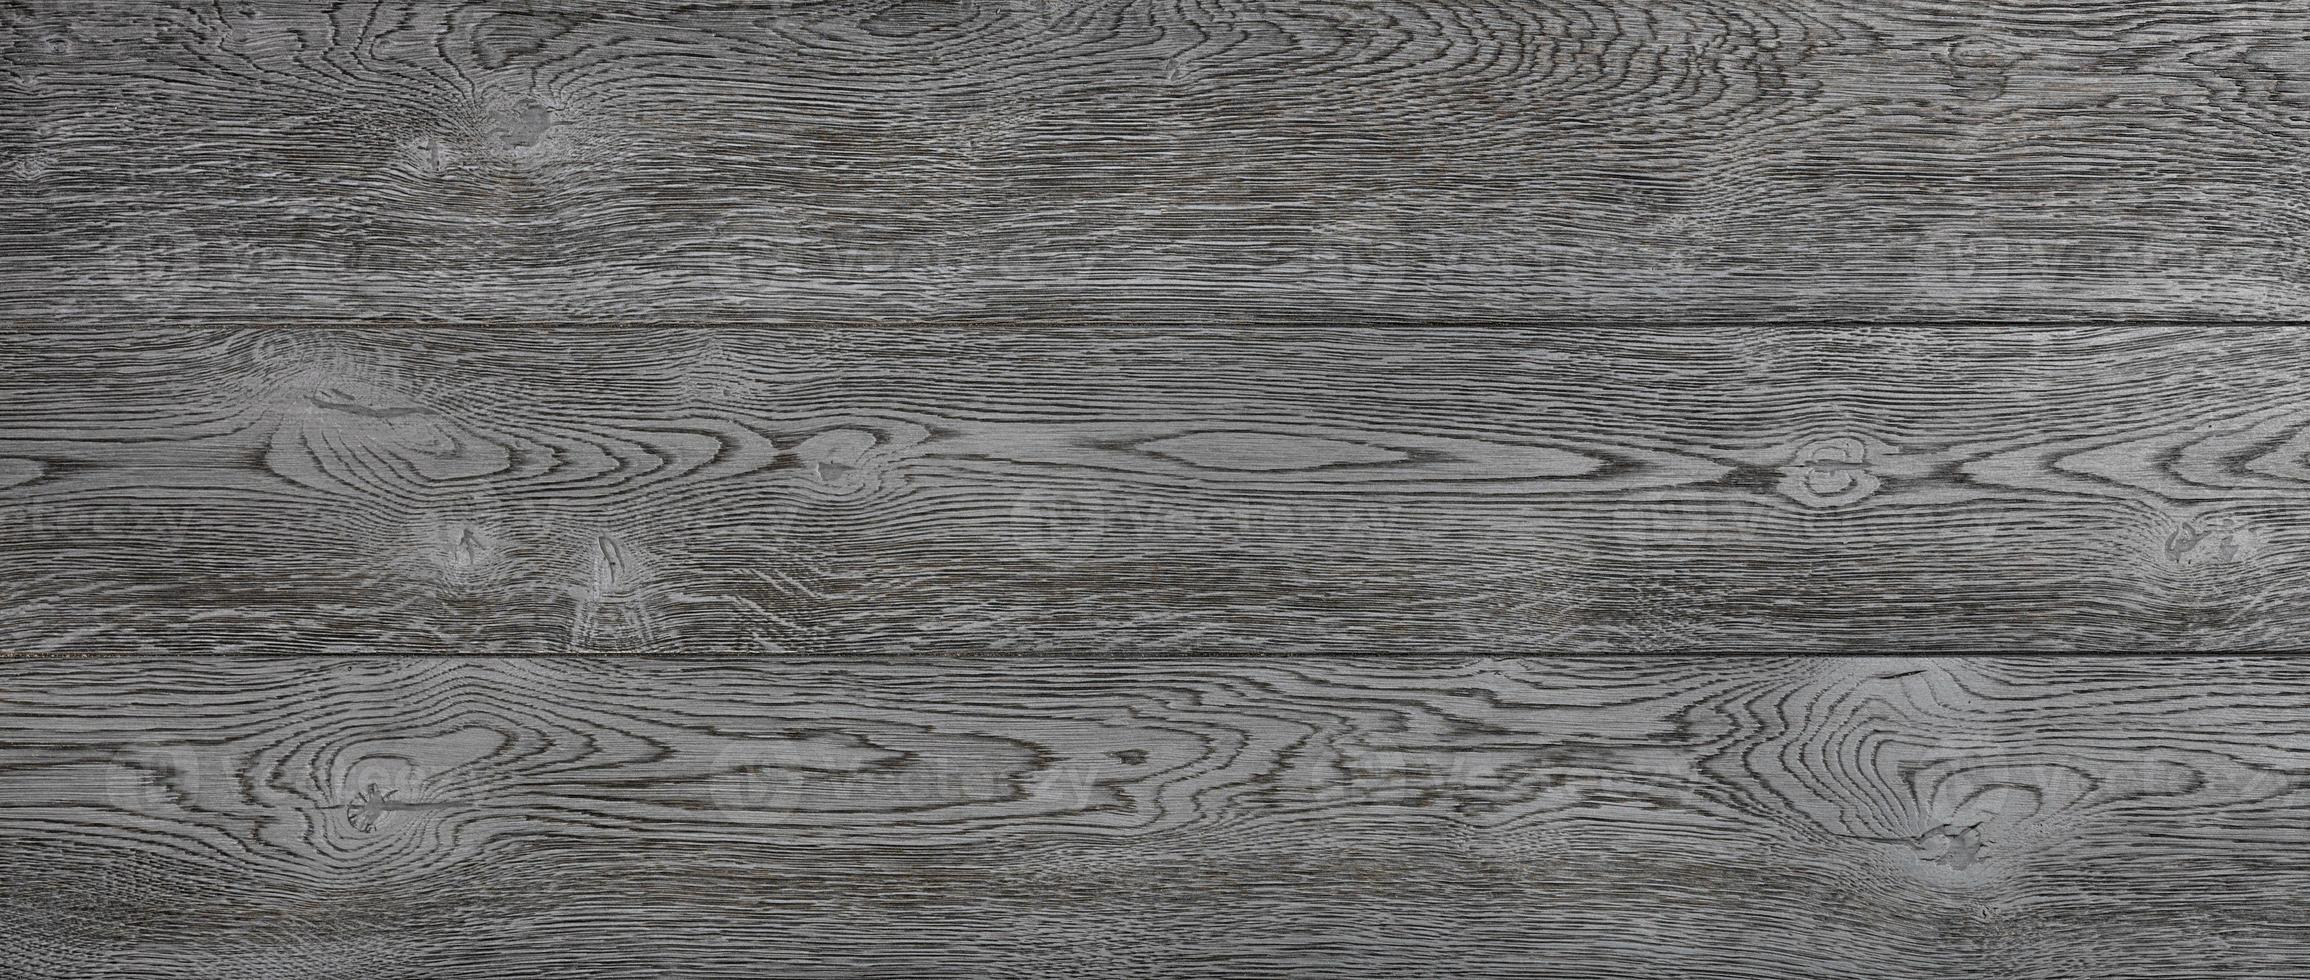 Expressive texture of black wood planks with longitudinal grains and knots. photo